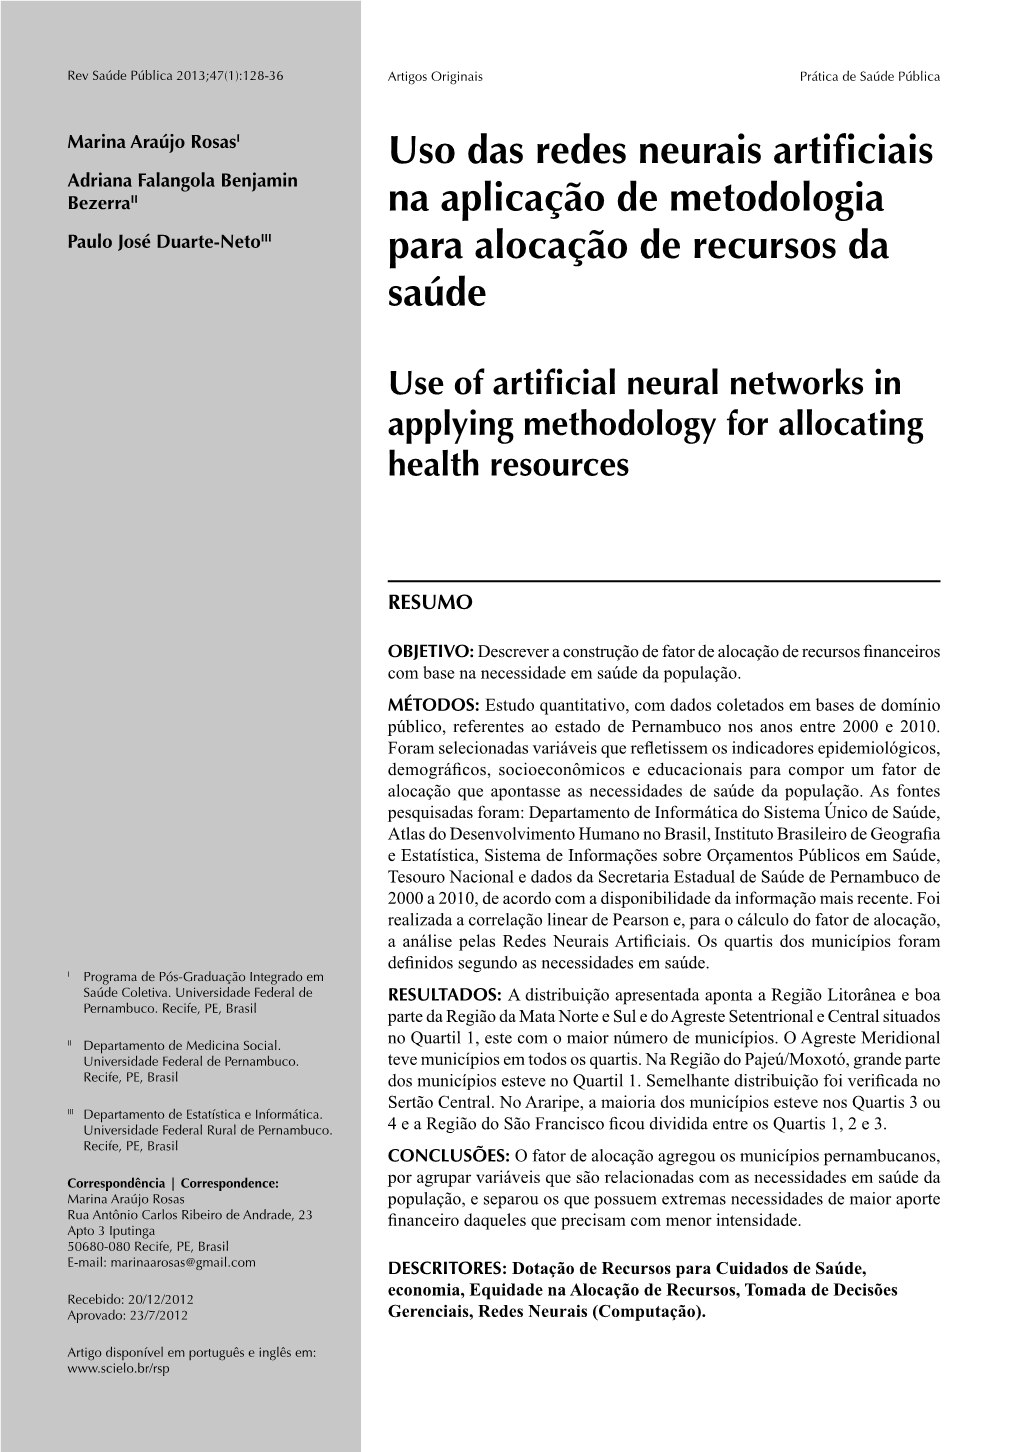 Use of Artificial Neural Networks in Applying Methodology for Allocating